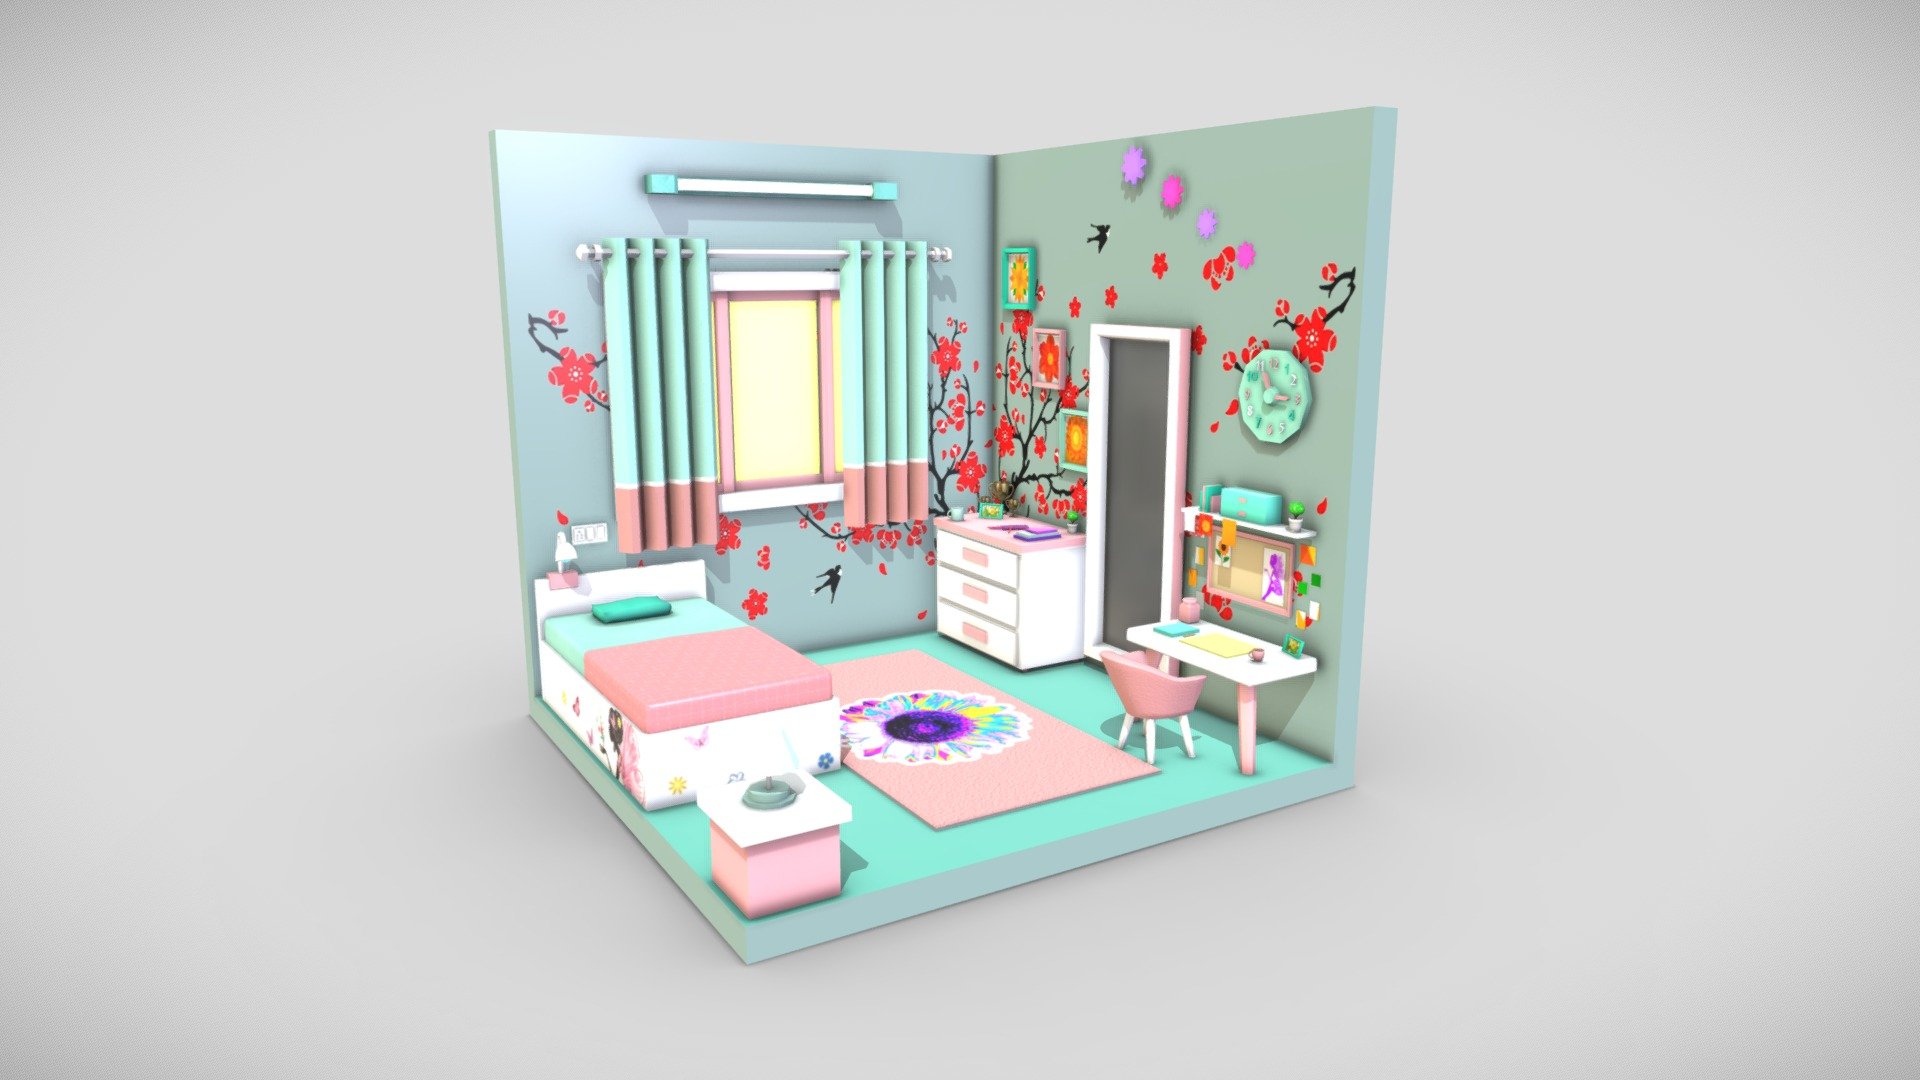 Low Poly Isometric Baby Girl Room done for Sketchfab Low Poly Isometric Room Challenge - Low Poly Isometric Baby Girl Room - Download Free 3D model by Abhijeet (@Abhijeet.in) 3d model